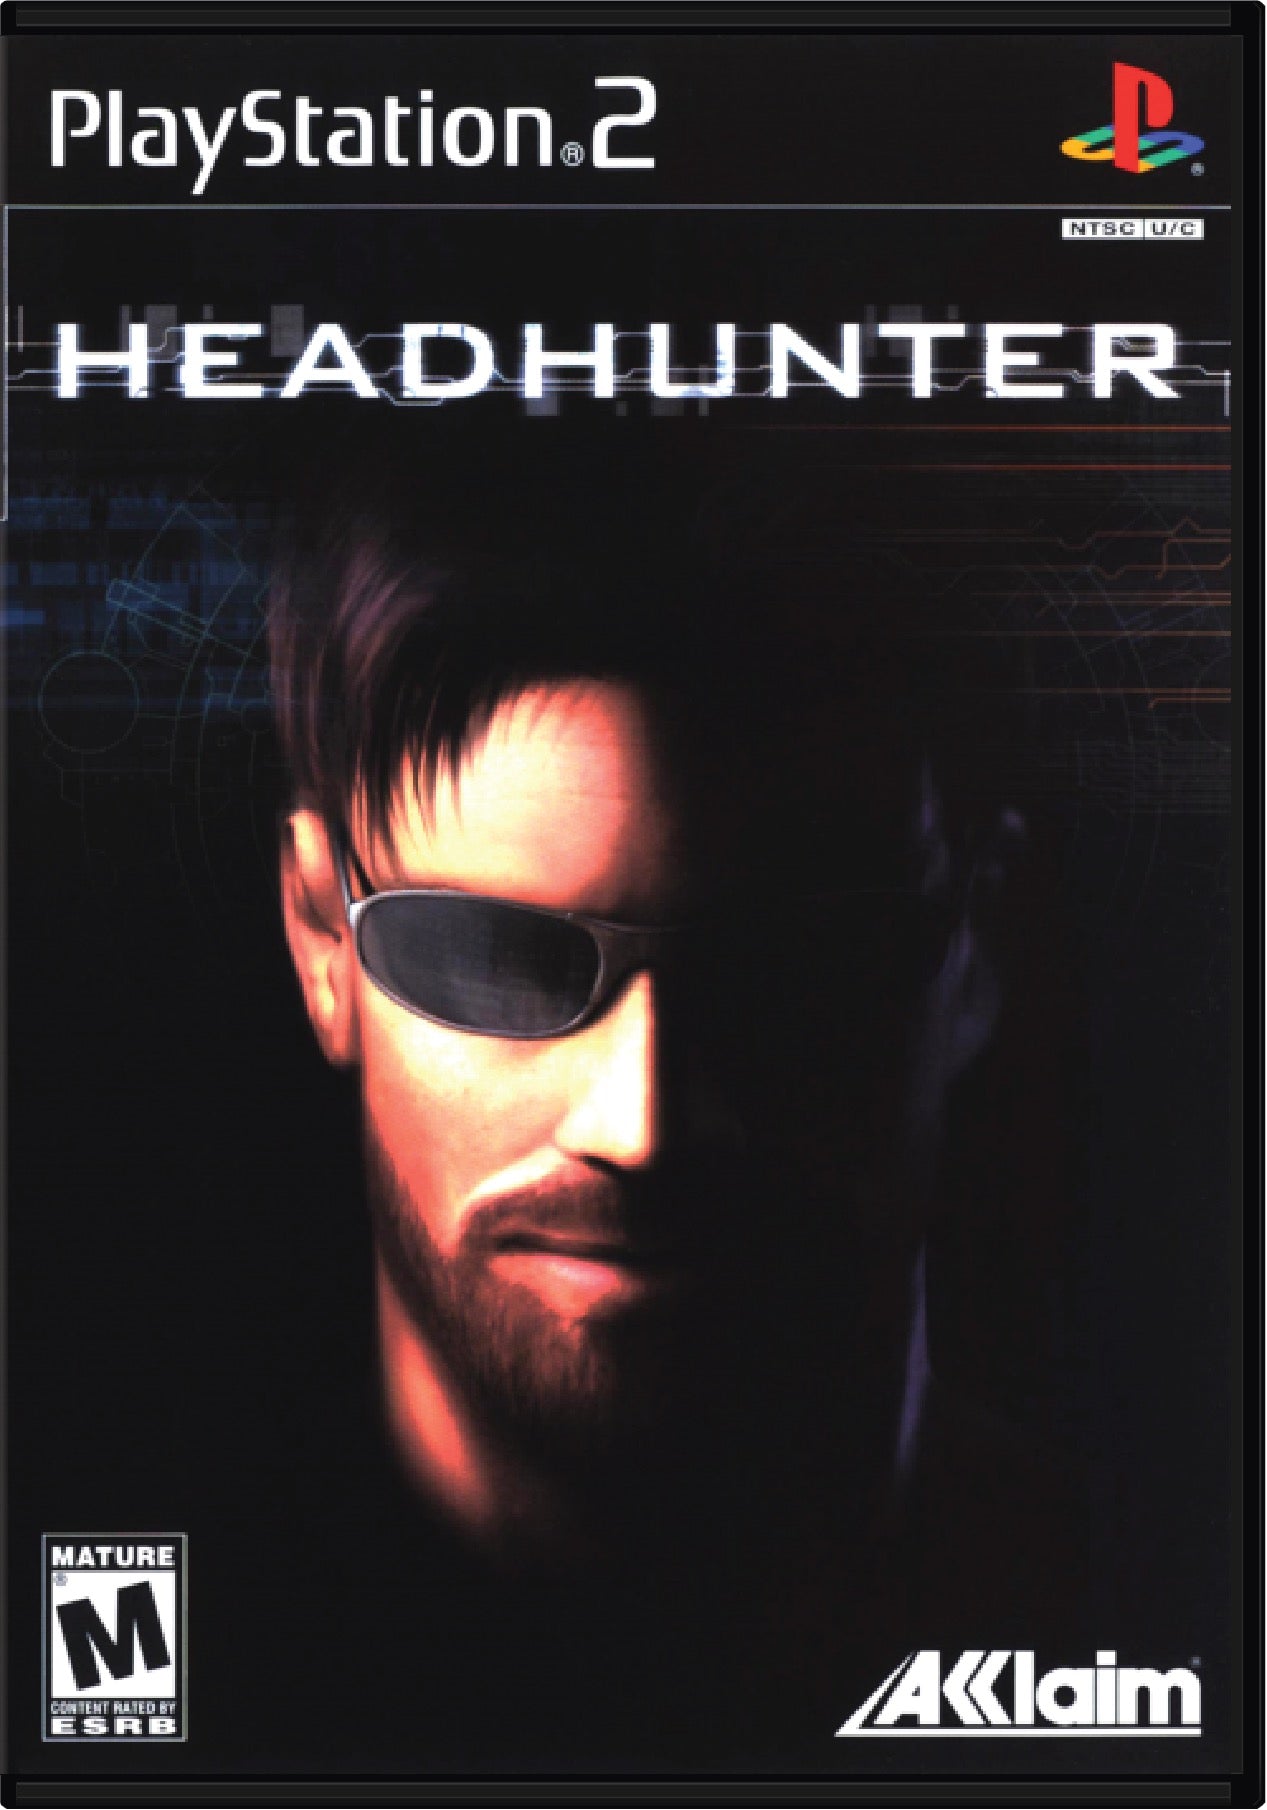 Headhunter Cover Art and Product Photo